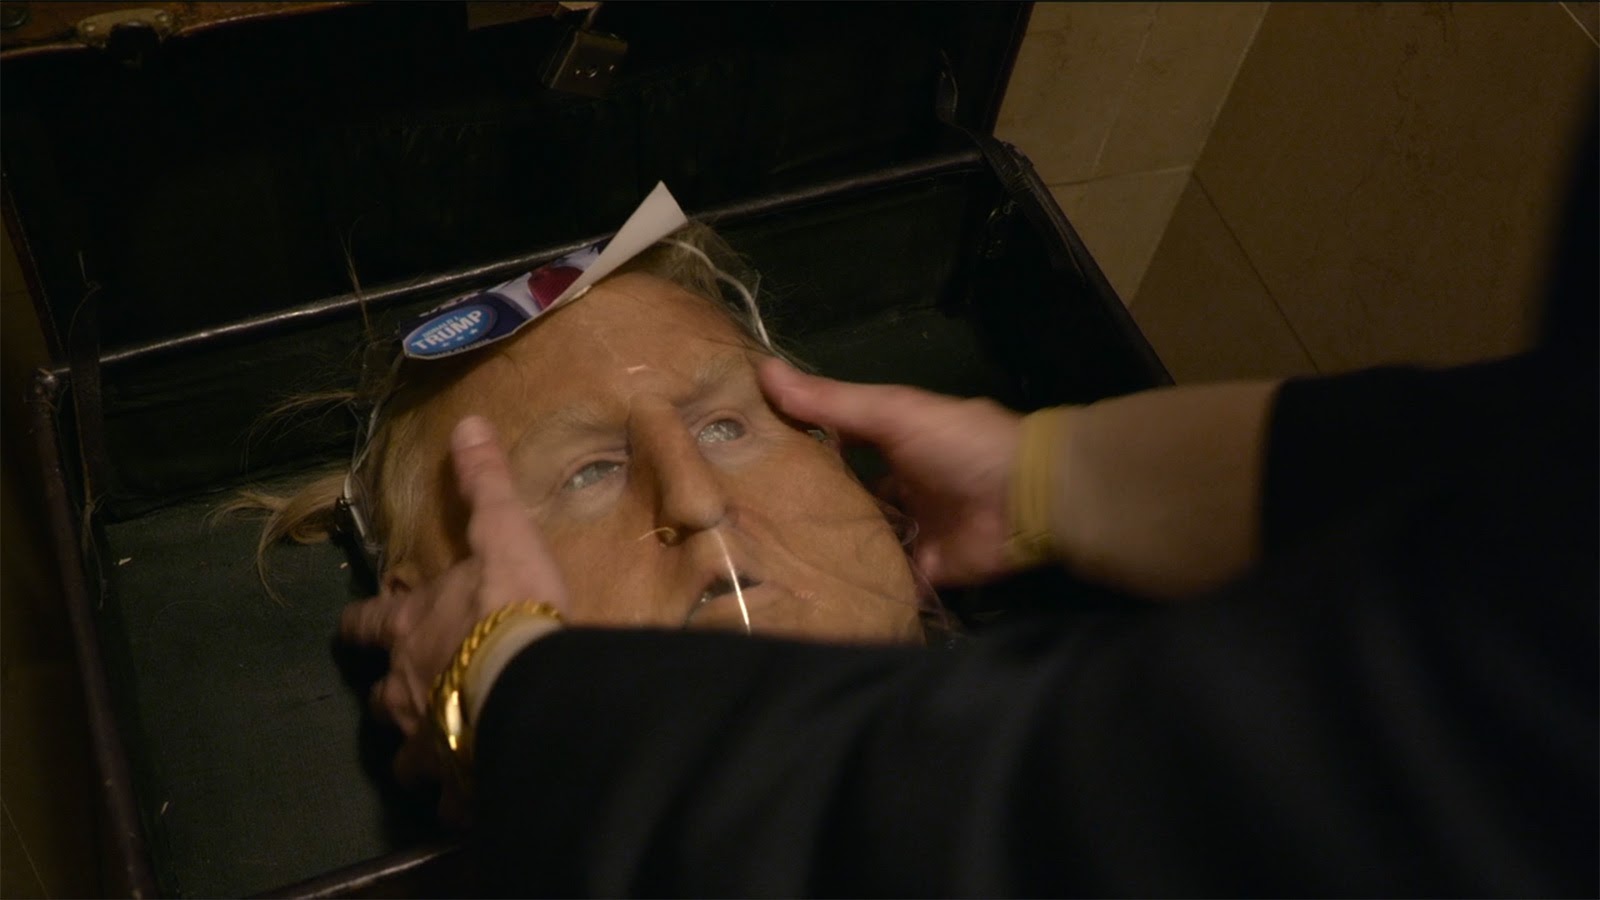 The Donald Trump mask unpacked